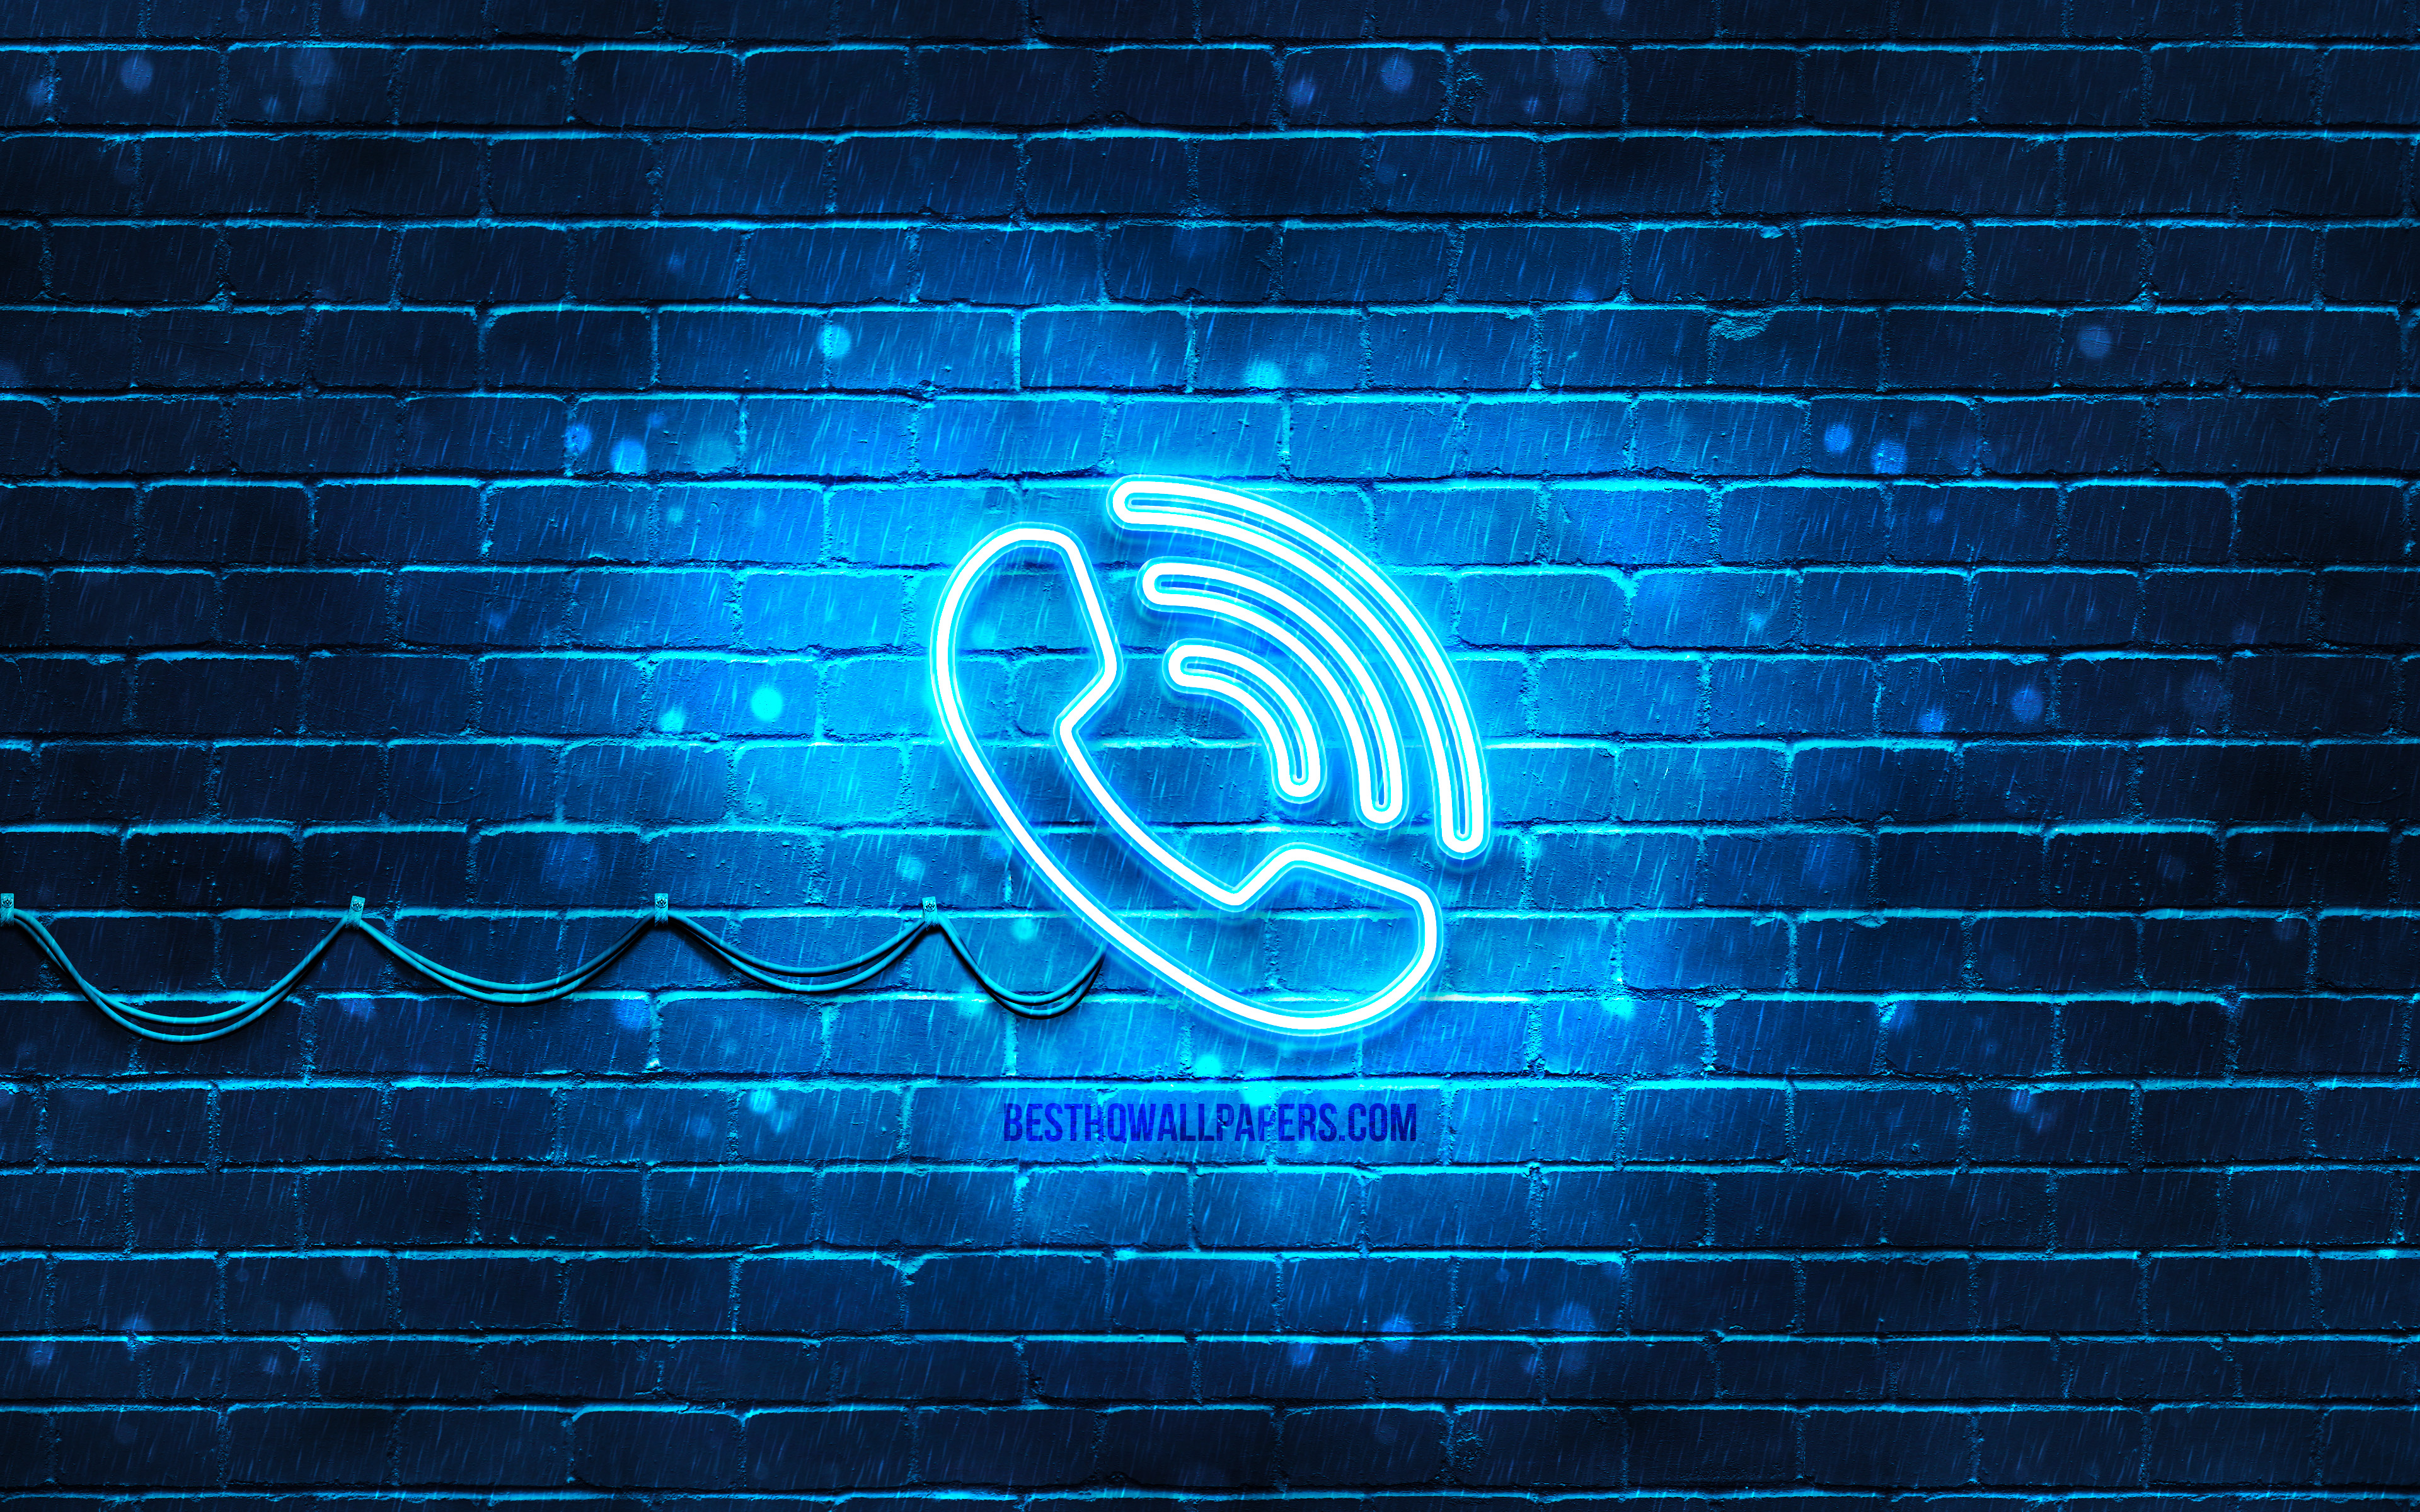 Download wallpaper Phone Call neon icon, 4k, blue background, neon symbols, Phone Call, neon icons, Phone Call sign, technology signs, Phone Call icon, technology icons for desktop with resolution 3840x2400. High Quality